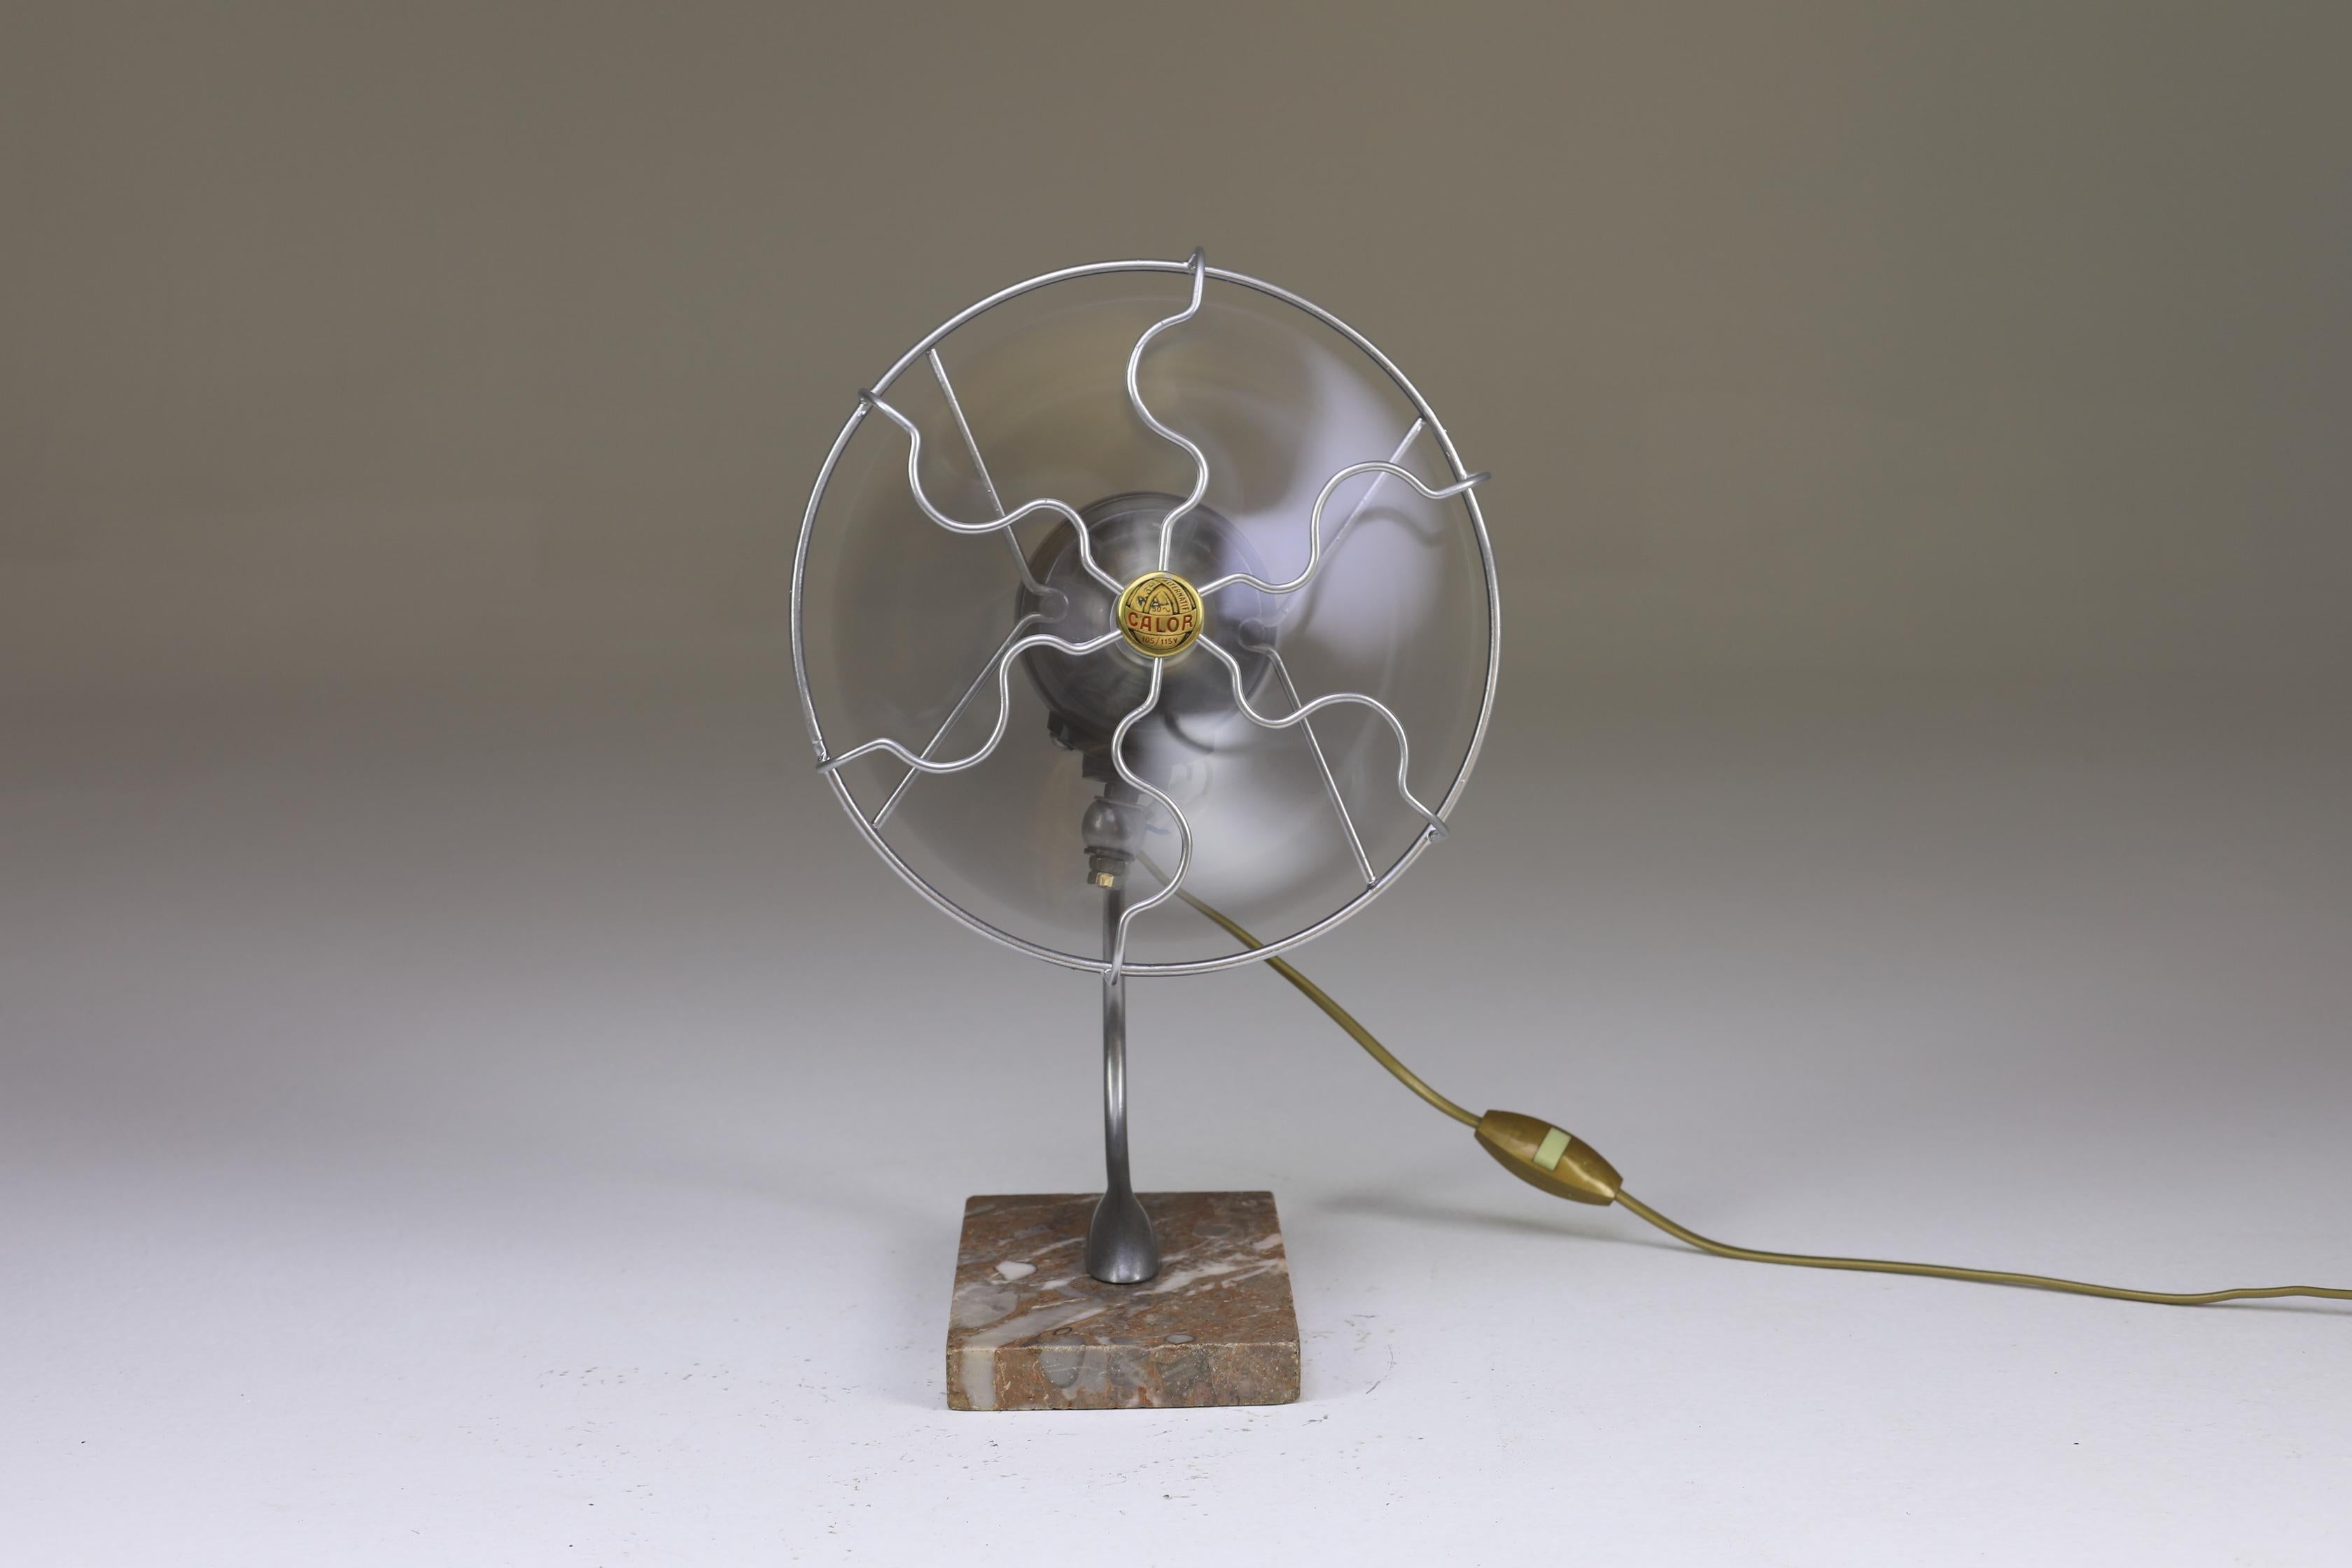 Industrial French Vintage Ventilator by Calor, 1940s